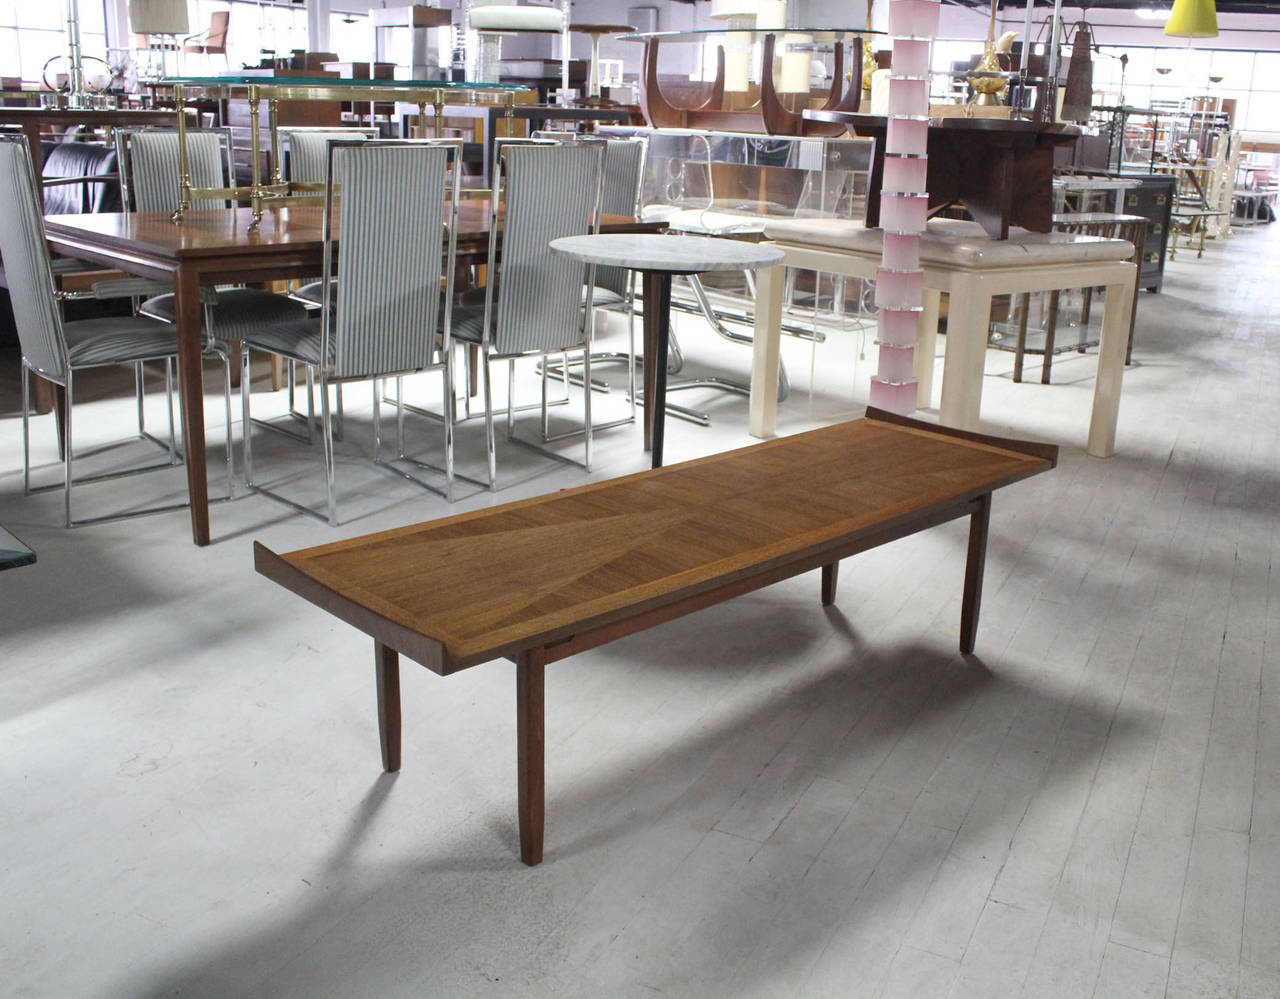 Very nice danish modern walnut coffee table with rolled ends. Mint condition.